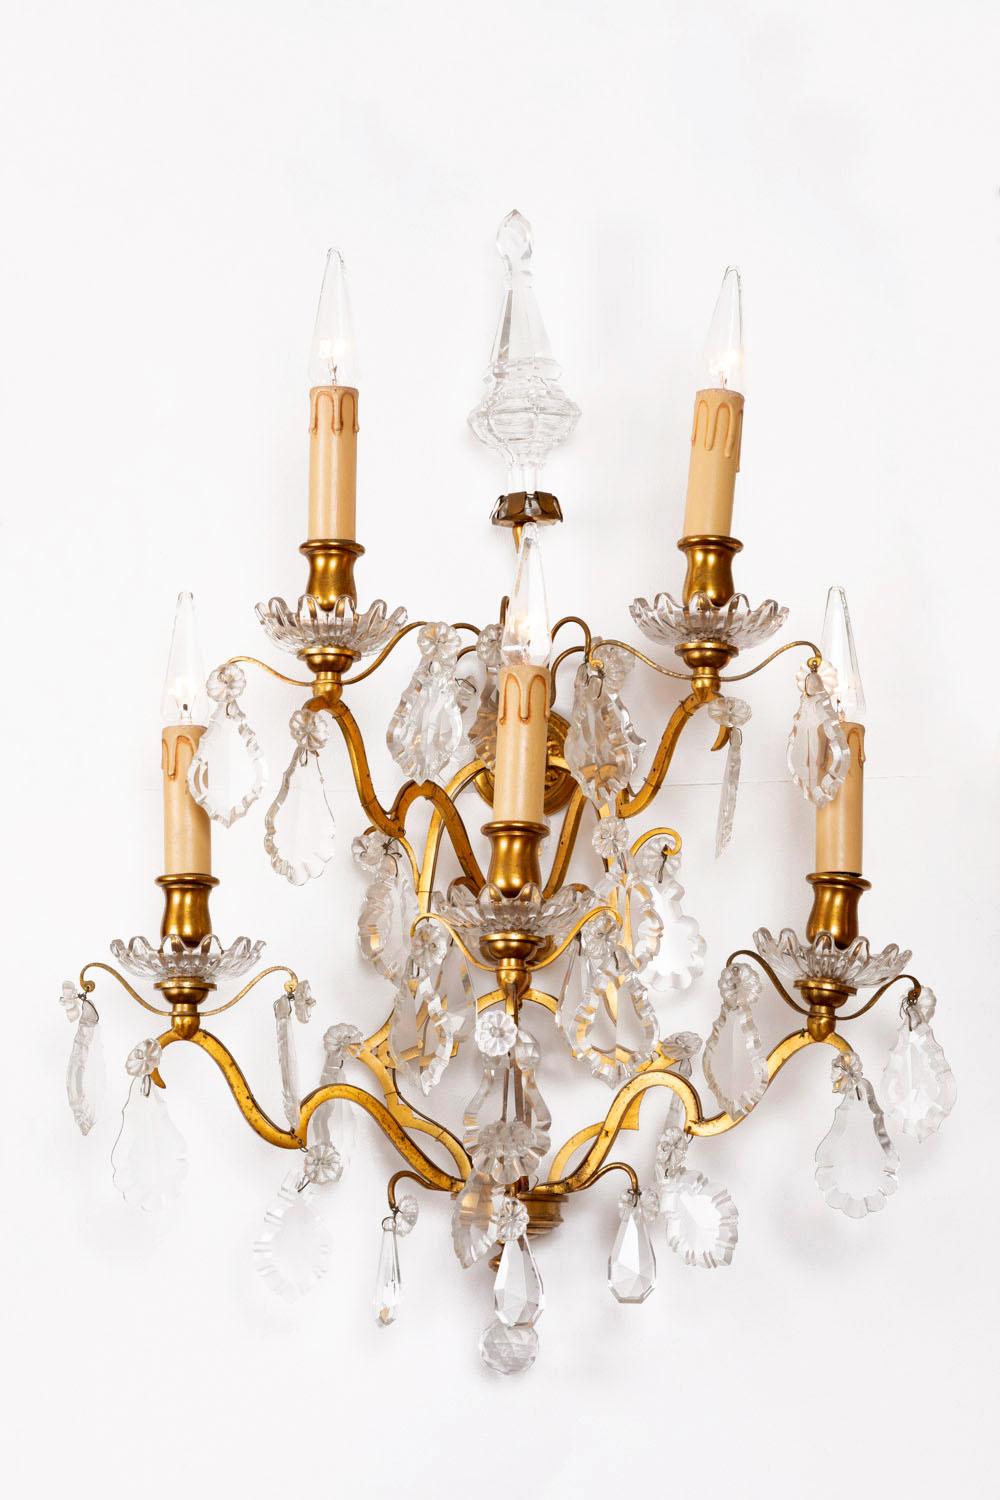 Pair of Louis XV style wall sconces with two levels and five-arm lights in gilt bronze curved shape receiving flower shaped cups topped by gilt bronze bobeches and fake candles.
Ornamentation of crystal tassels with drop, rosette and leaf shapes.